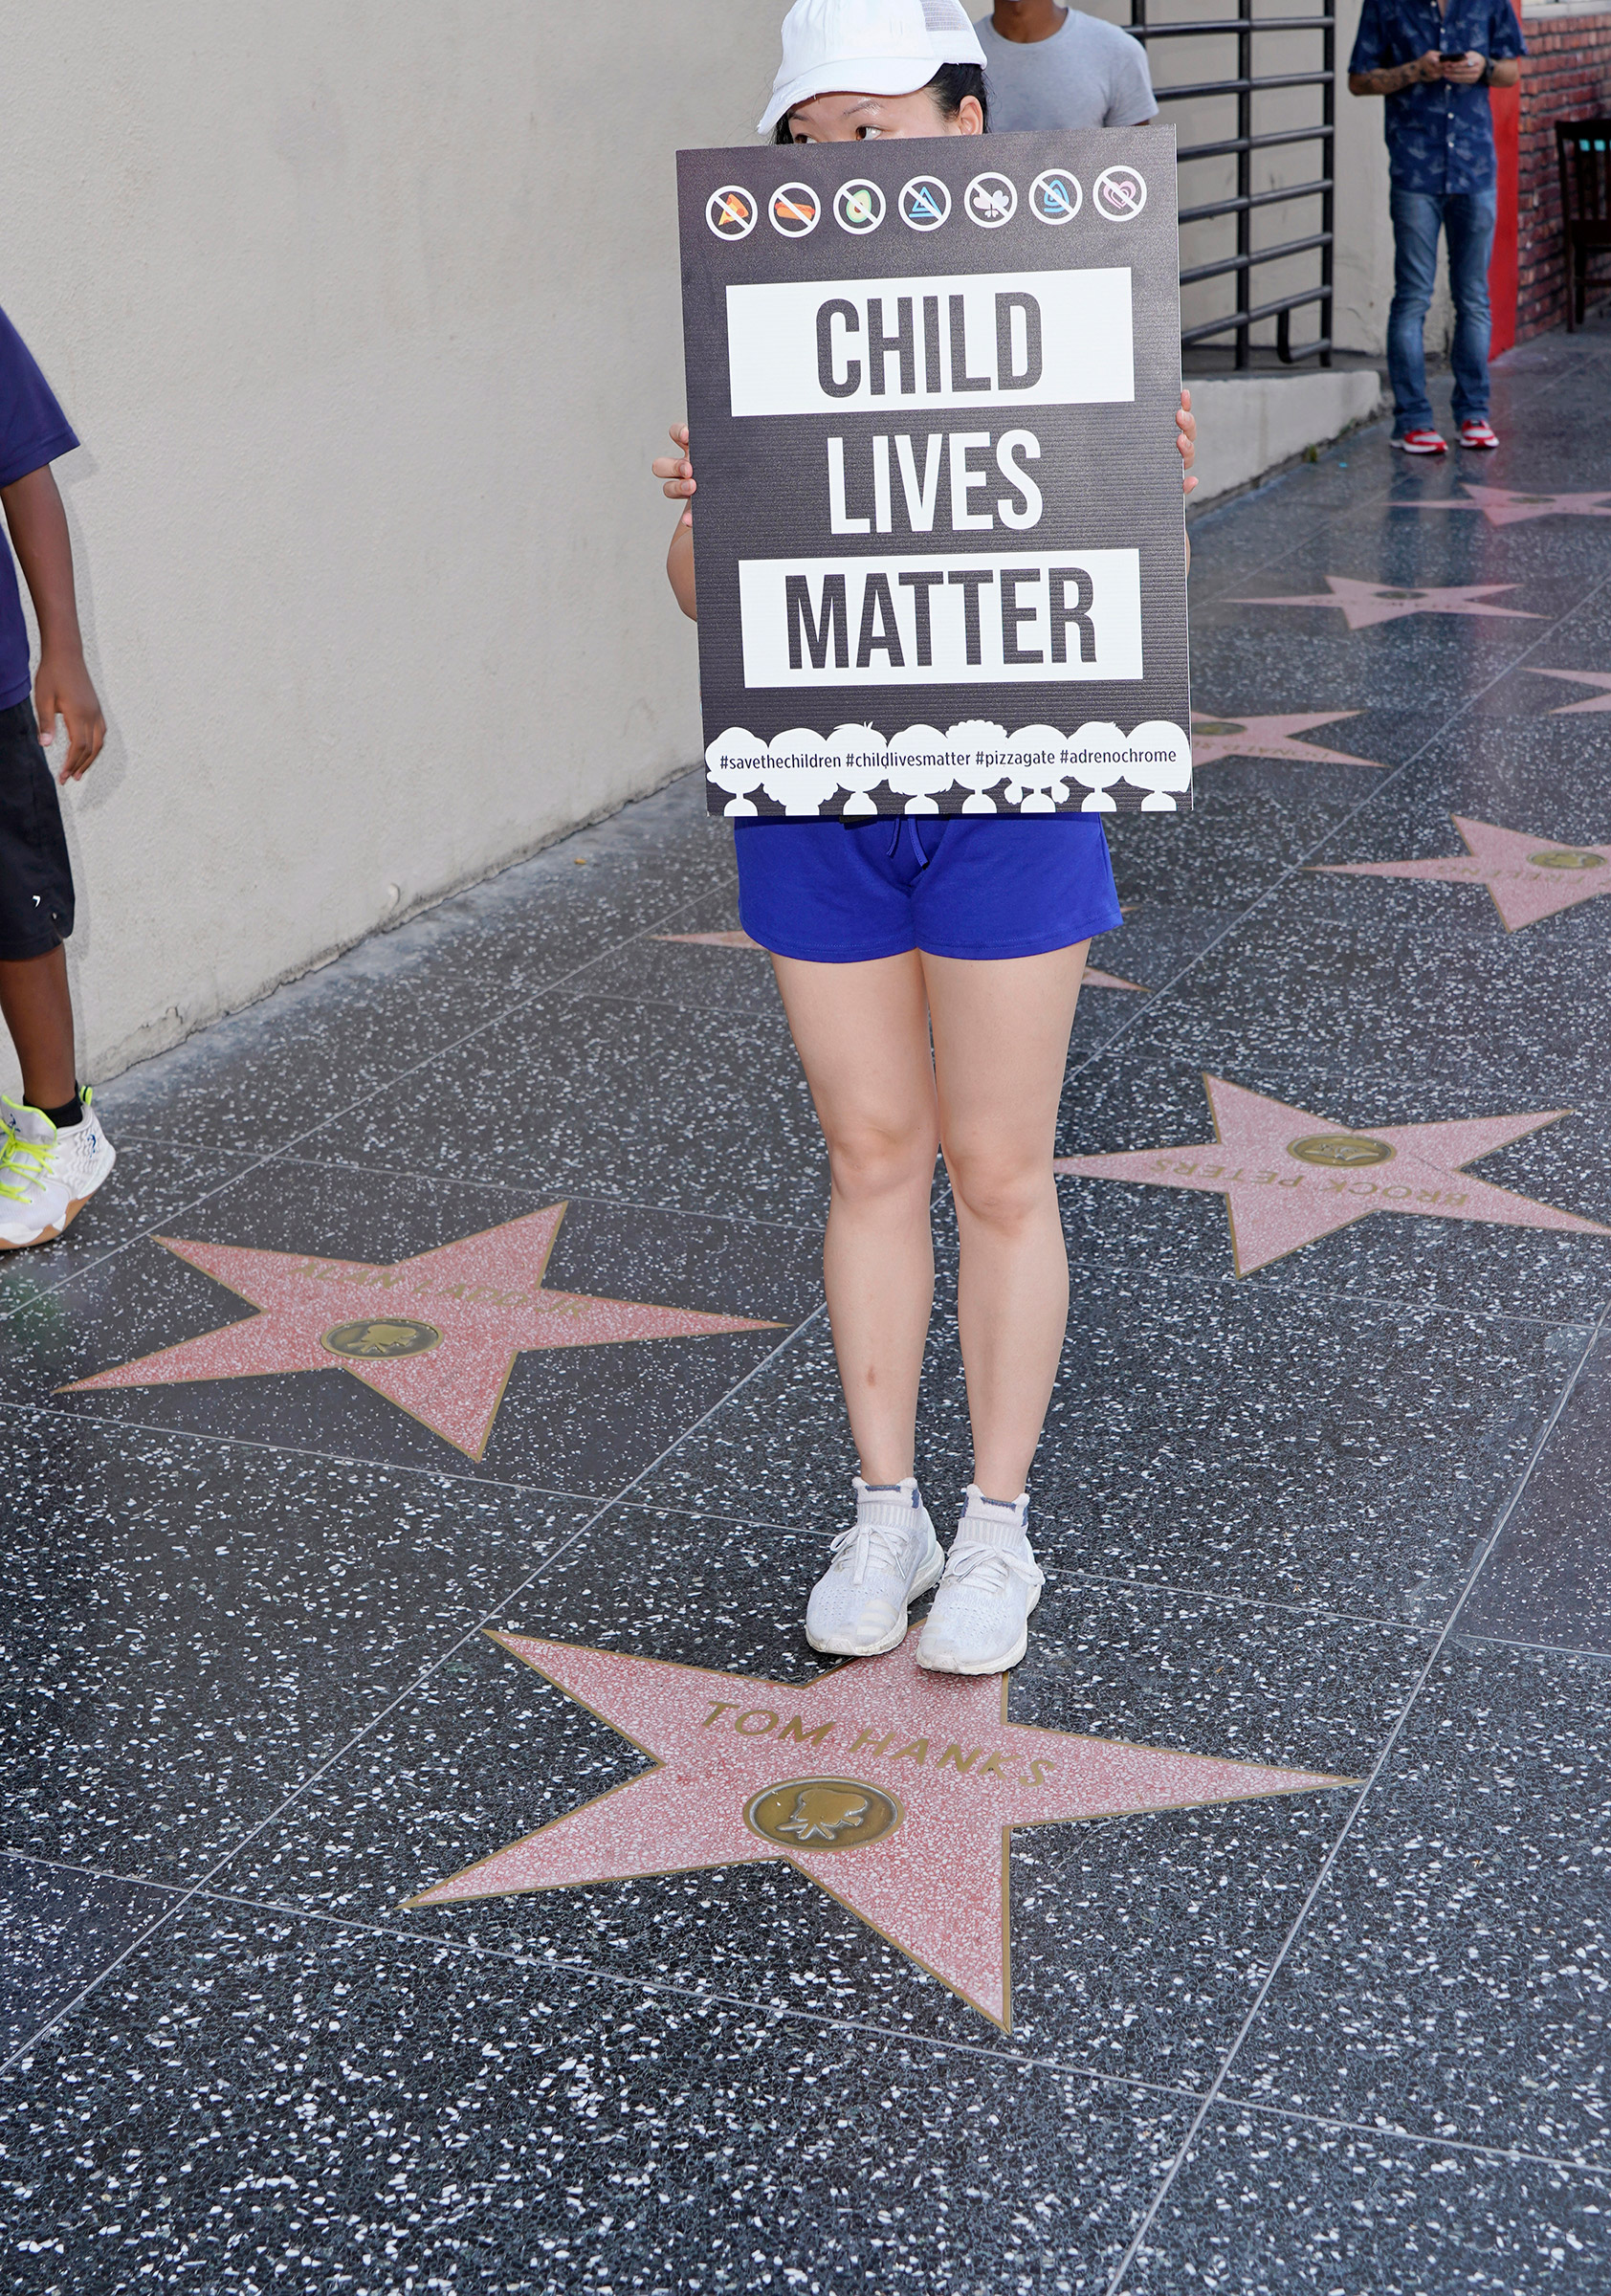 A protester stands on Tom Hanks' star on the Hollywood Walk of Fame, Aug. 22, 2020.